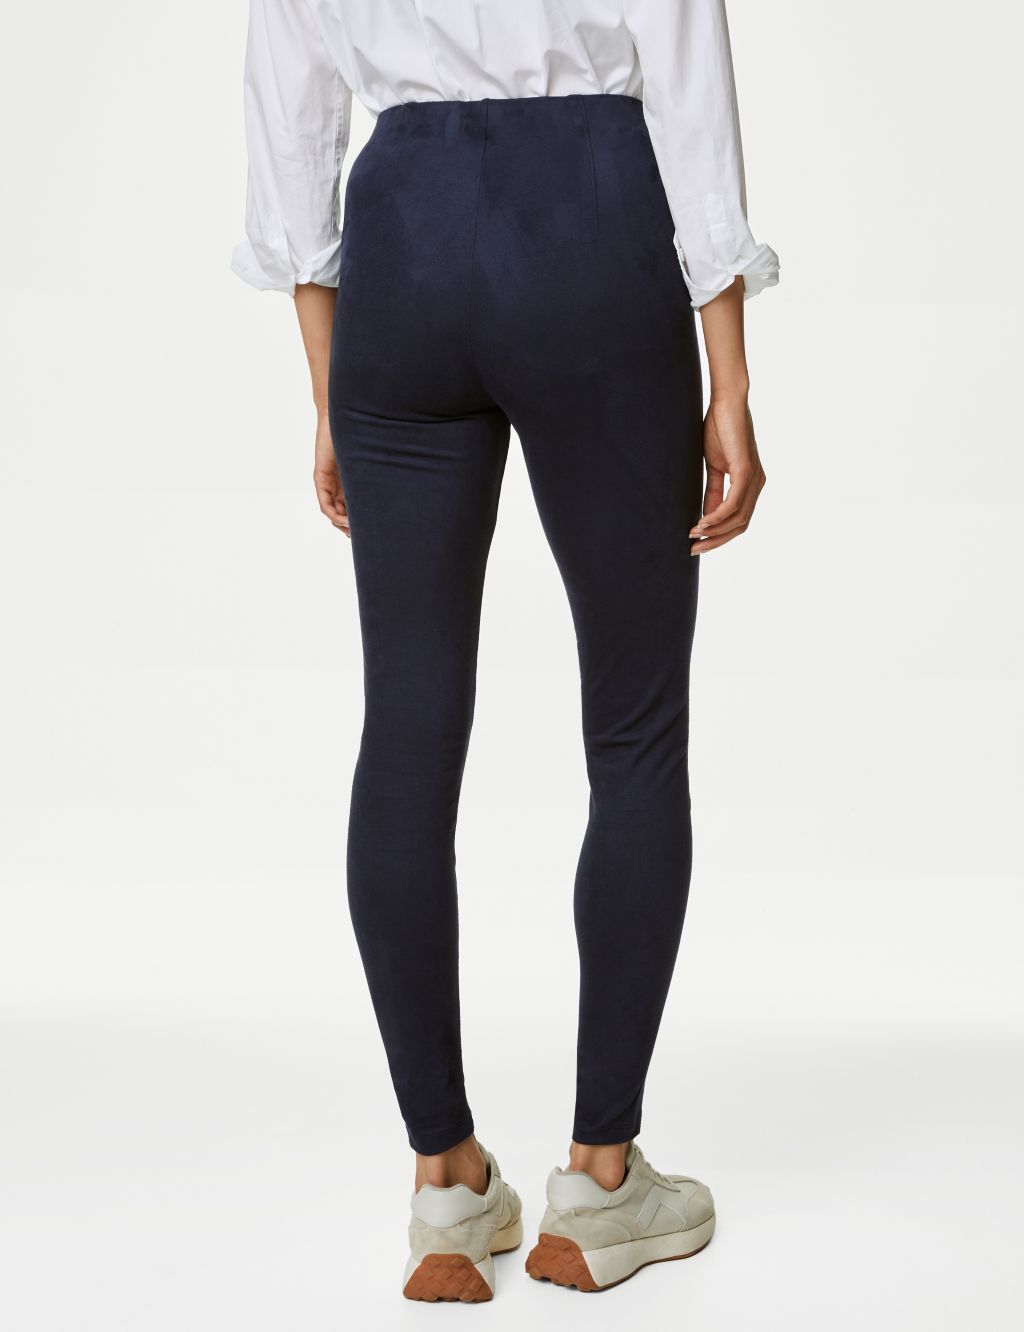 Suedette High Waisted Leggings image 5